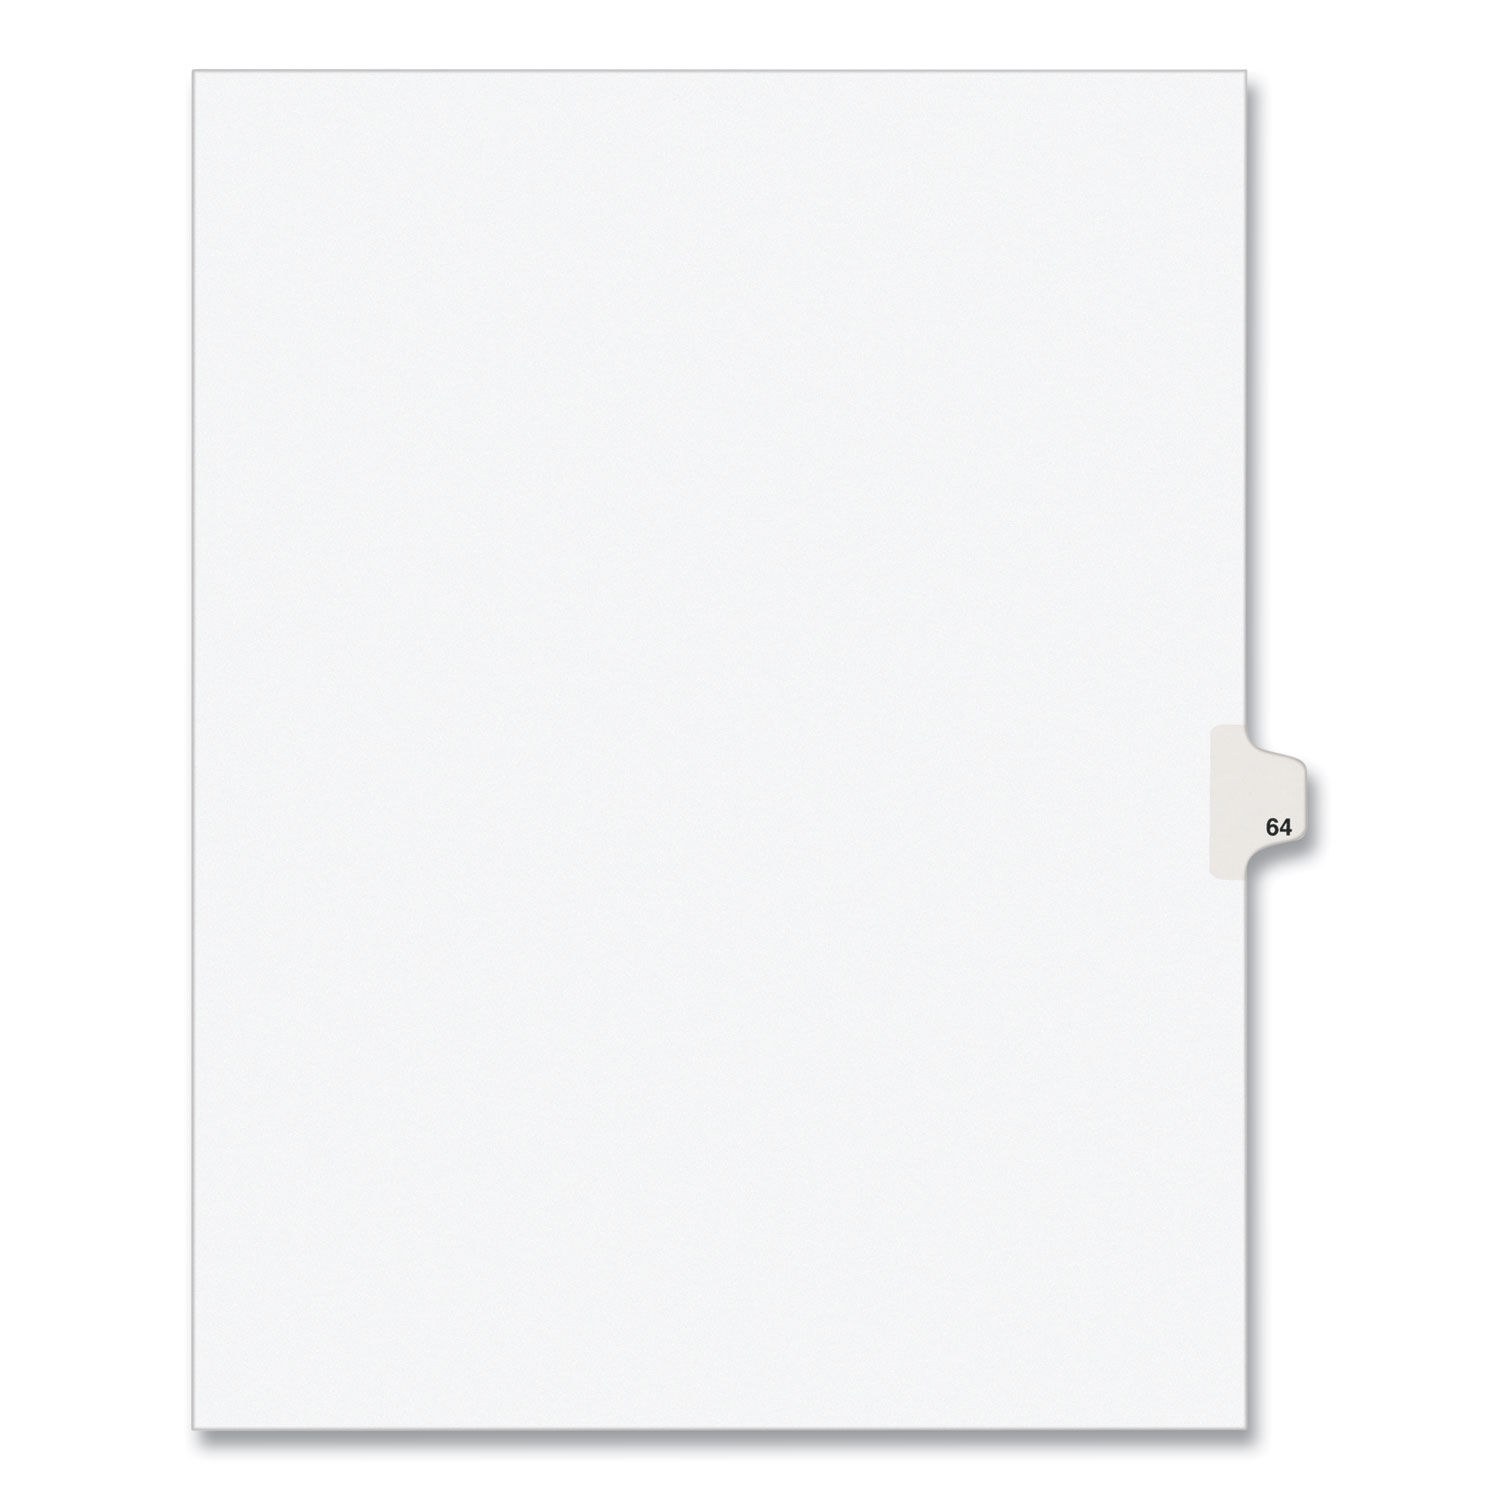 Preprinted Legal Exhibit Side Tab Index Dividers Avery Style, 10-Tab, 64, 11 x 8.5, White, 25/Pack, (1064)